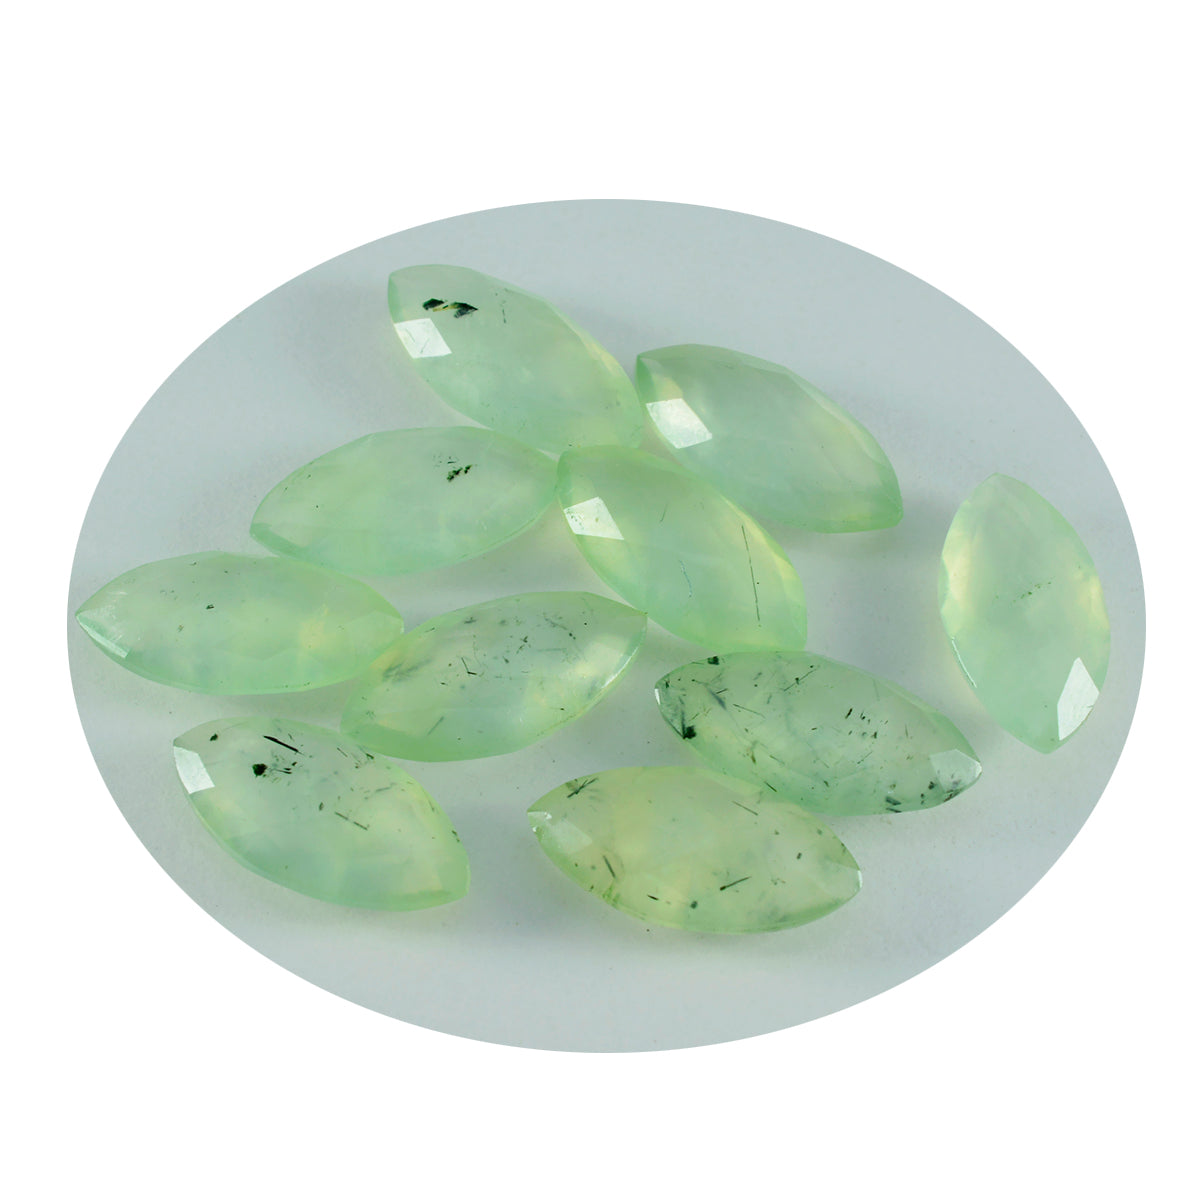 Riyogems 1PC Green Prehnite Faceted 7x14 mm Marquise Shape A+1 Quality Loose Stone